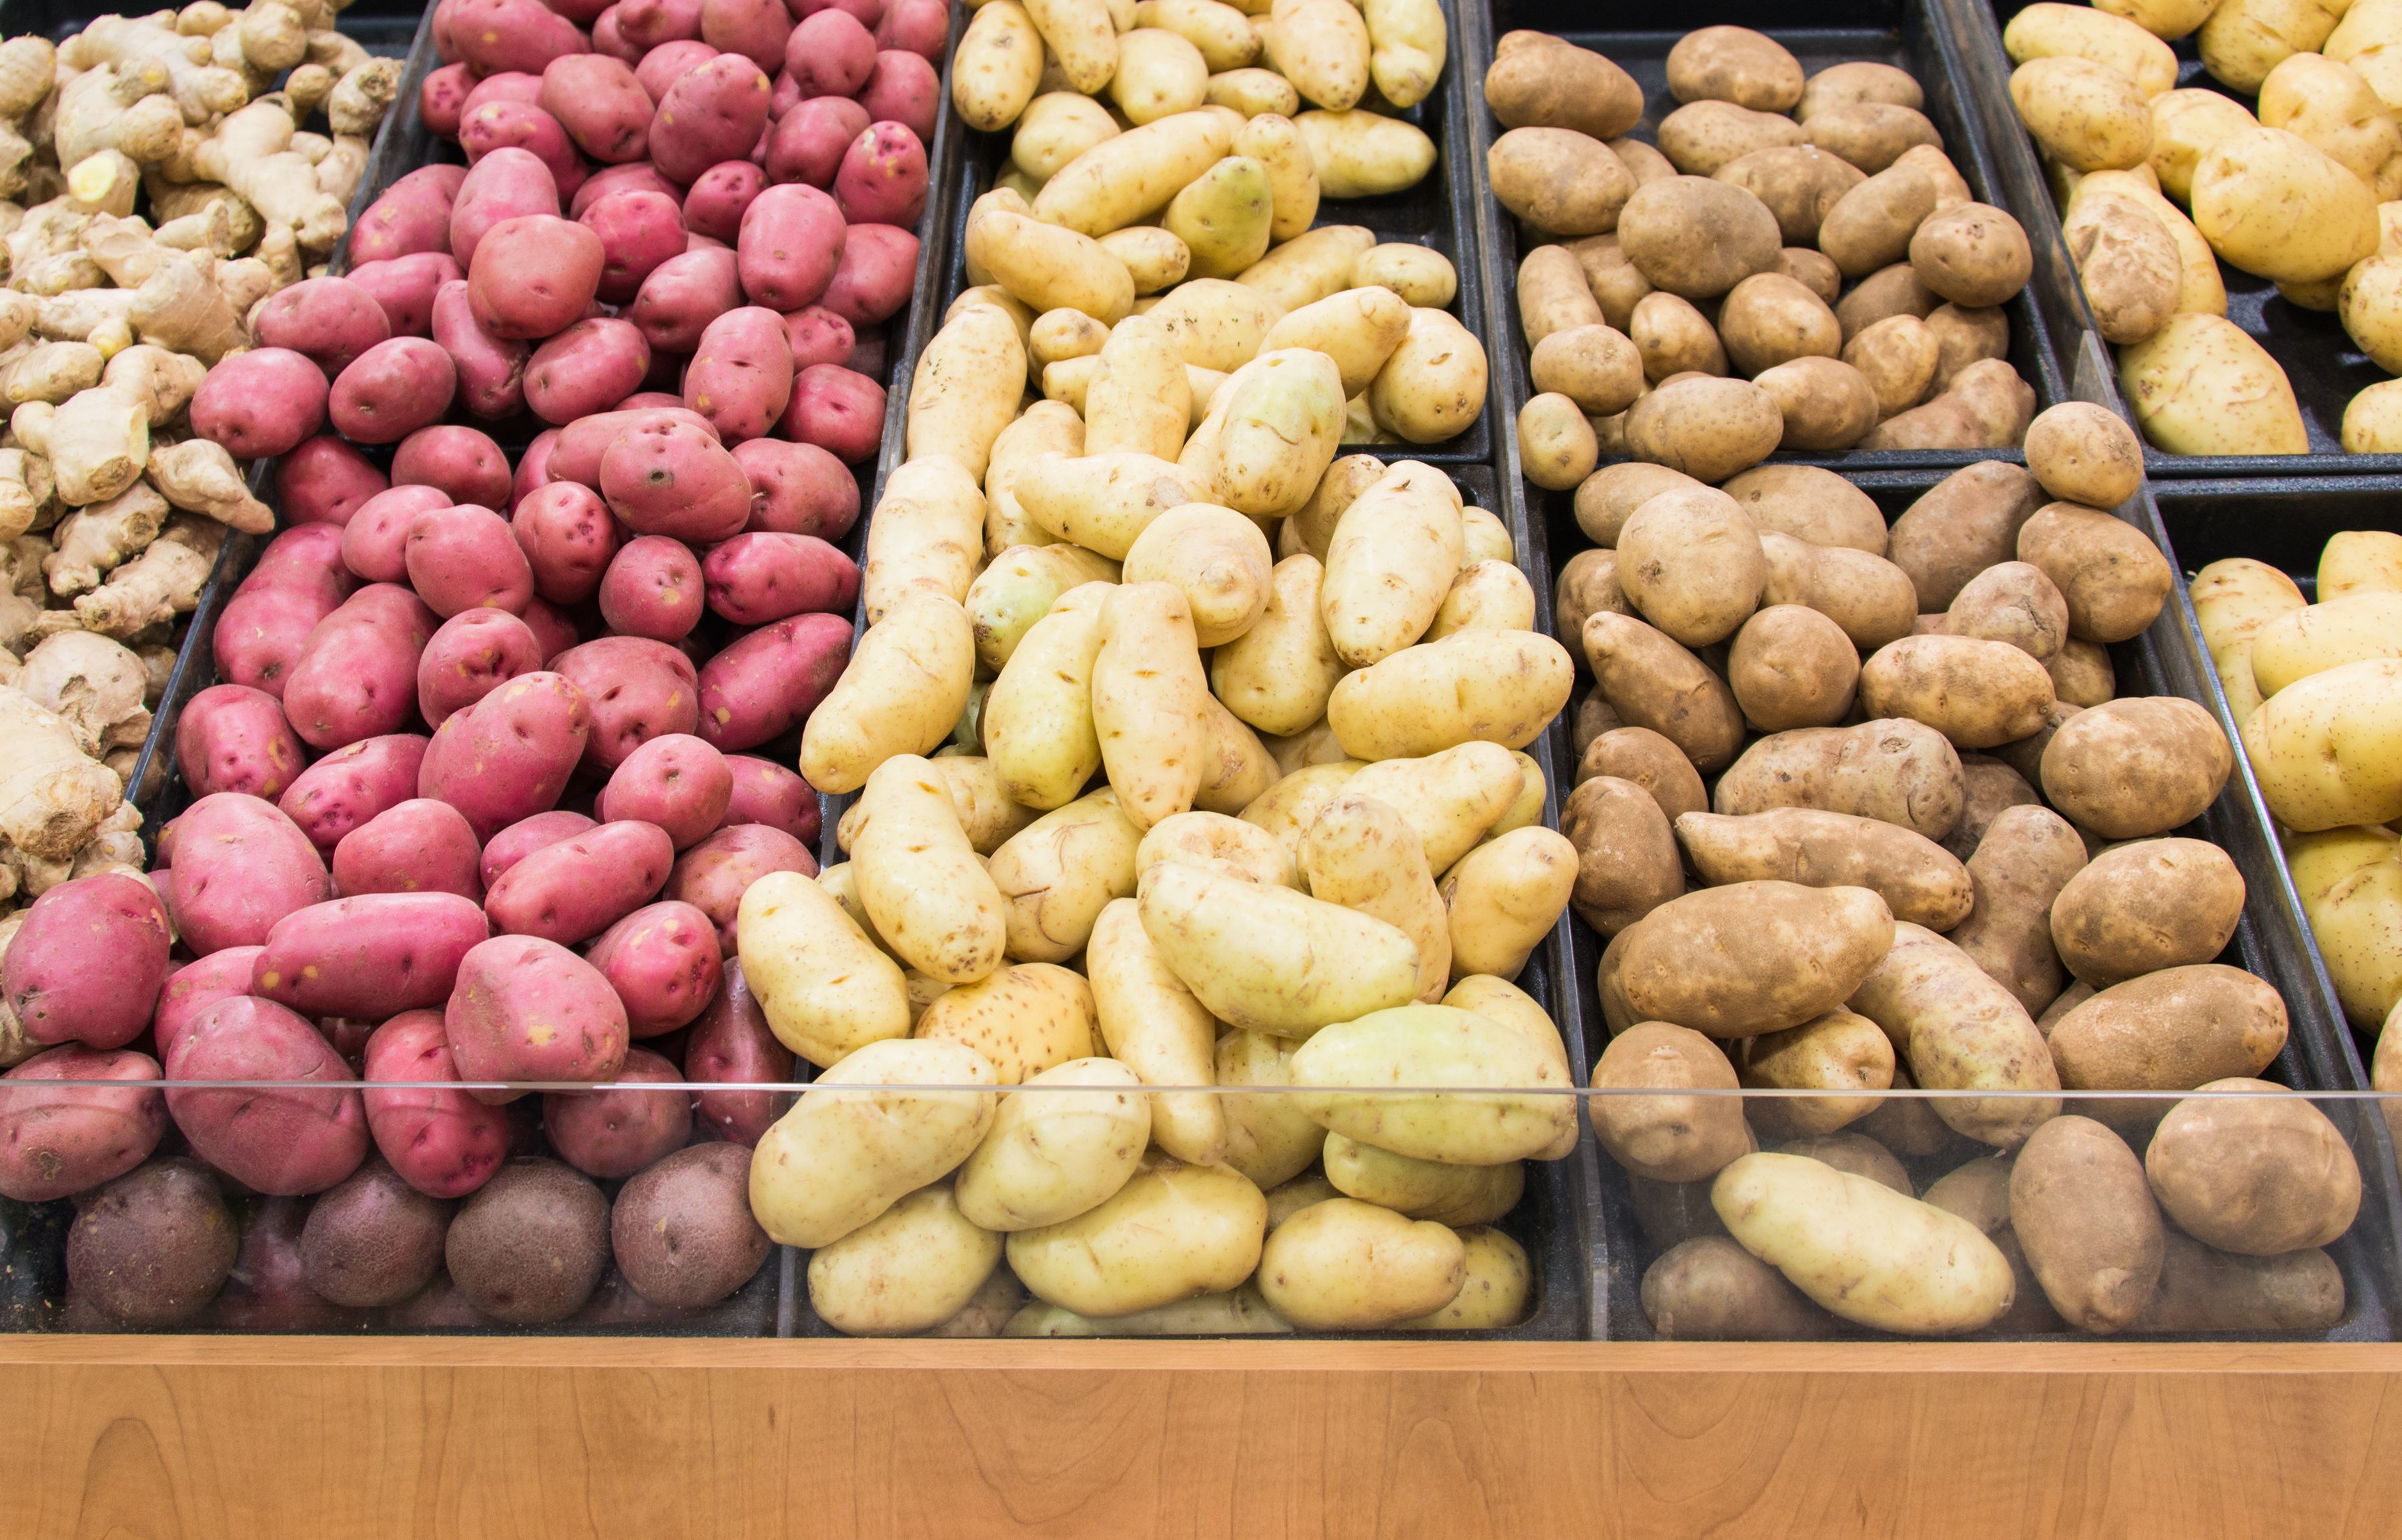 16 Types of Potatoes - Guide to Different Types of Potatoes